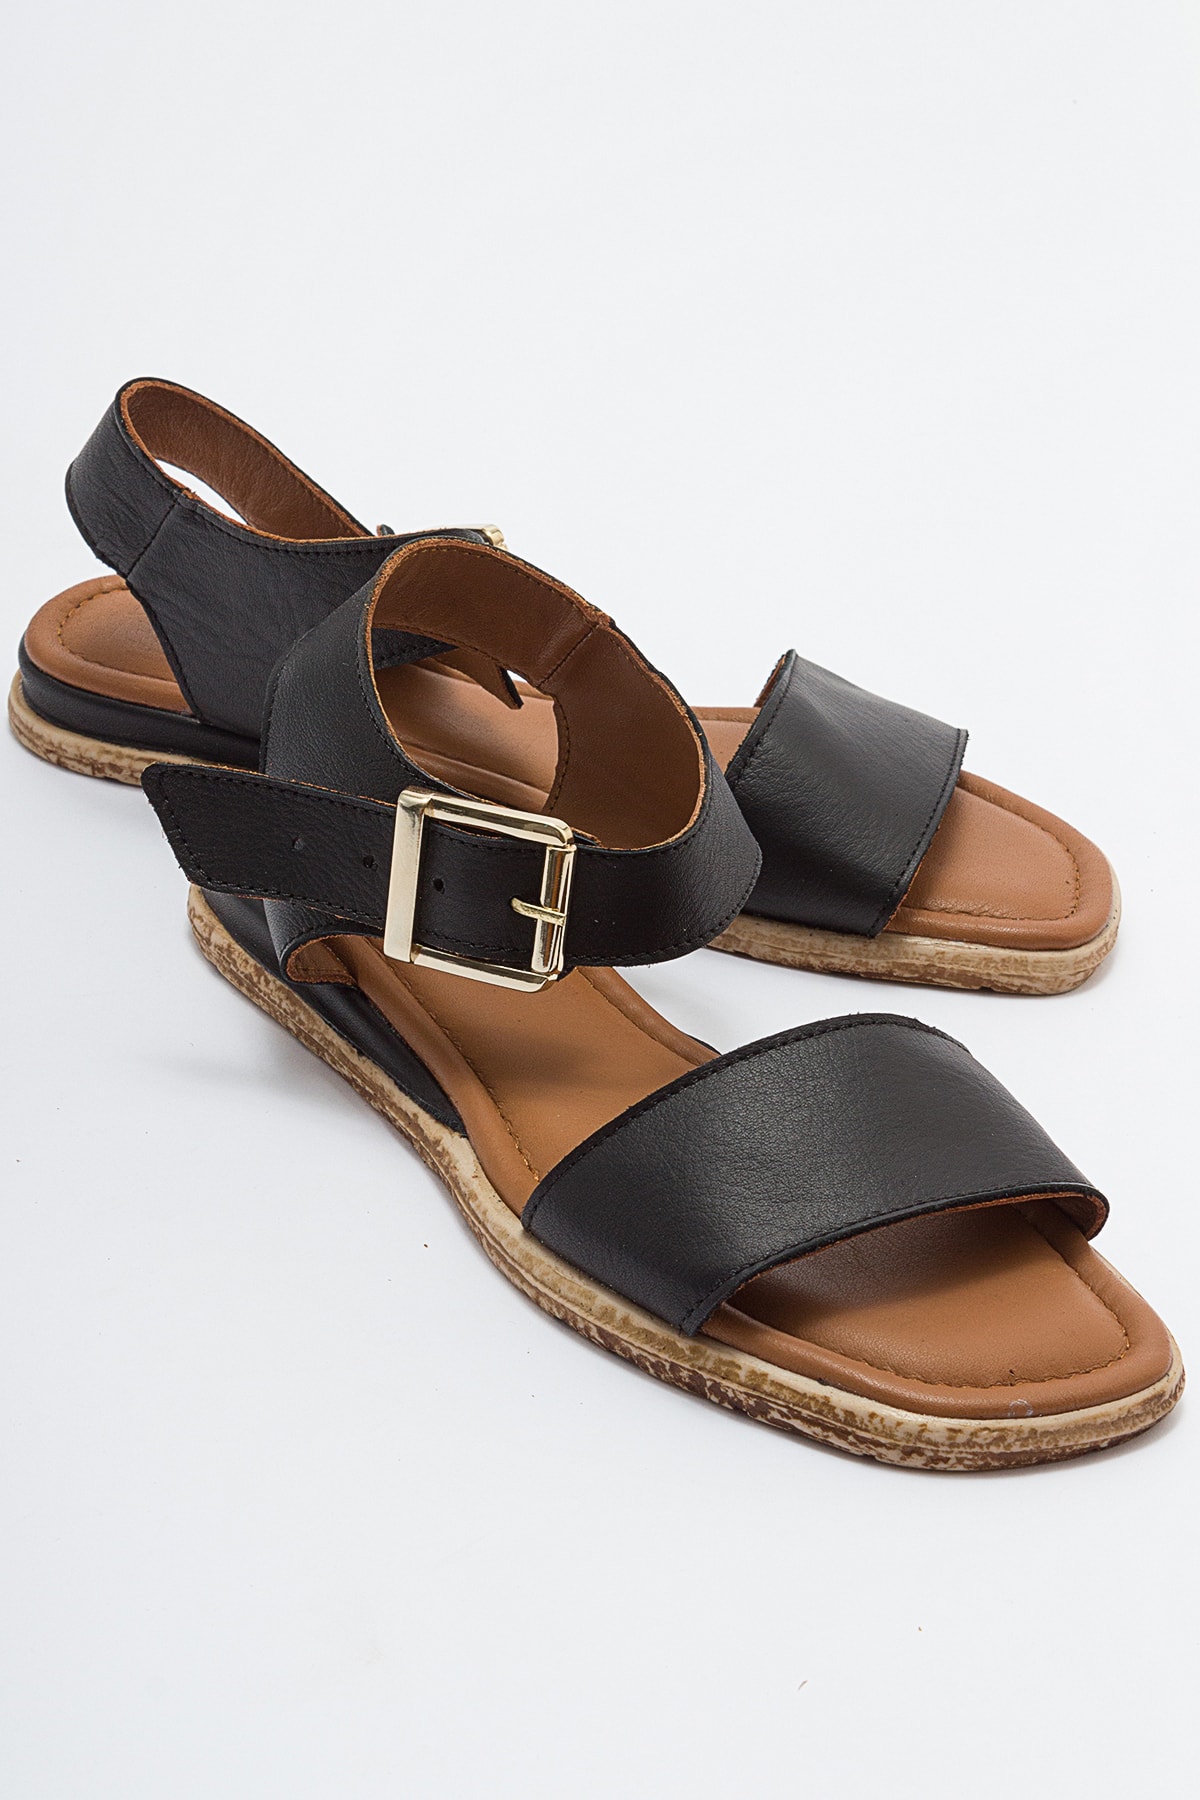 LuviShoes 713 Black Women's Sandals with Genuine Leather